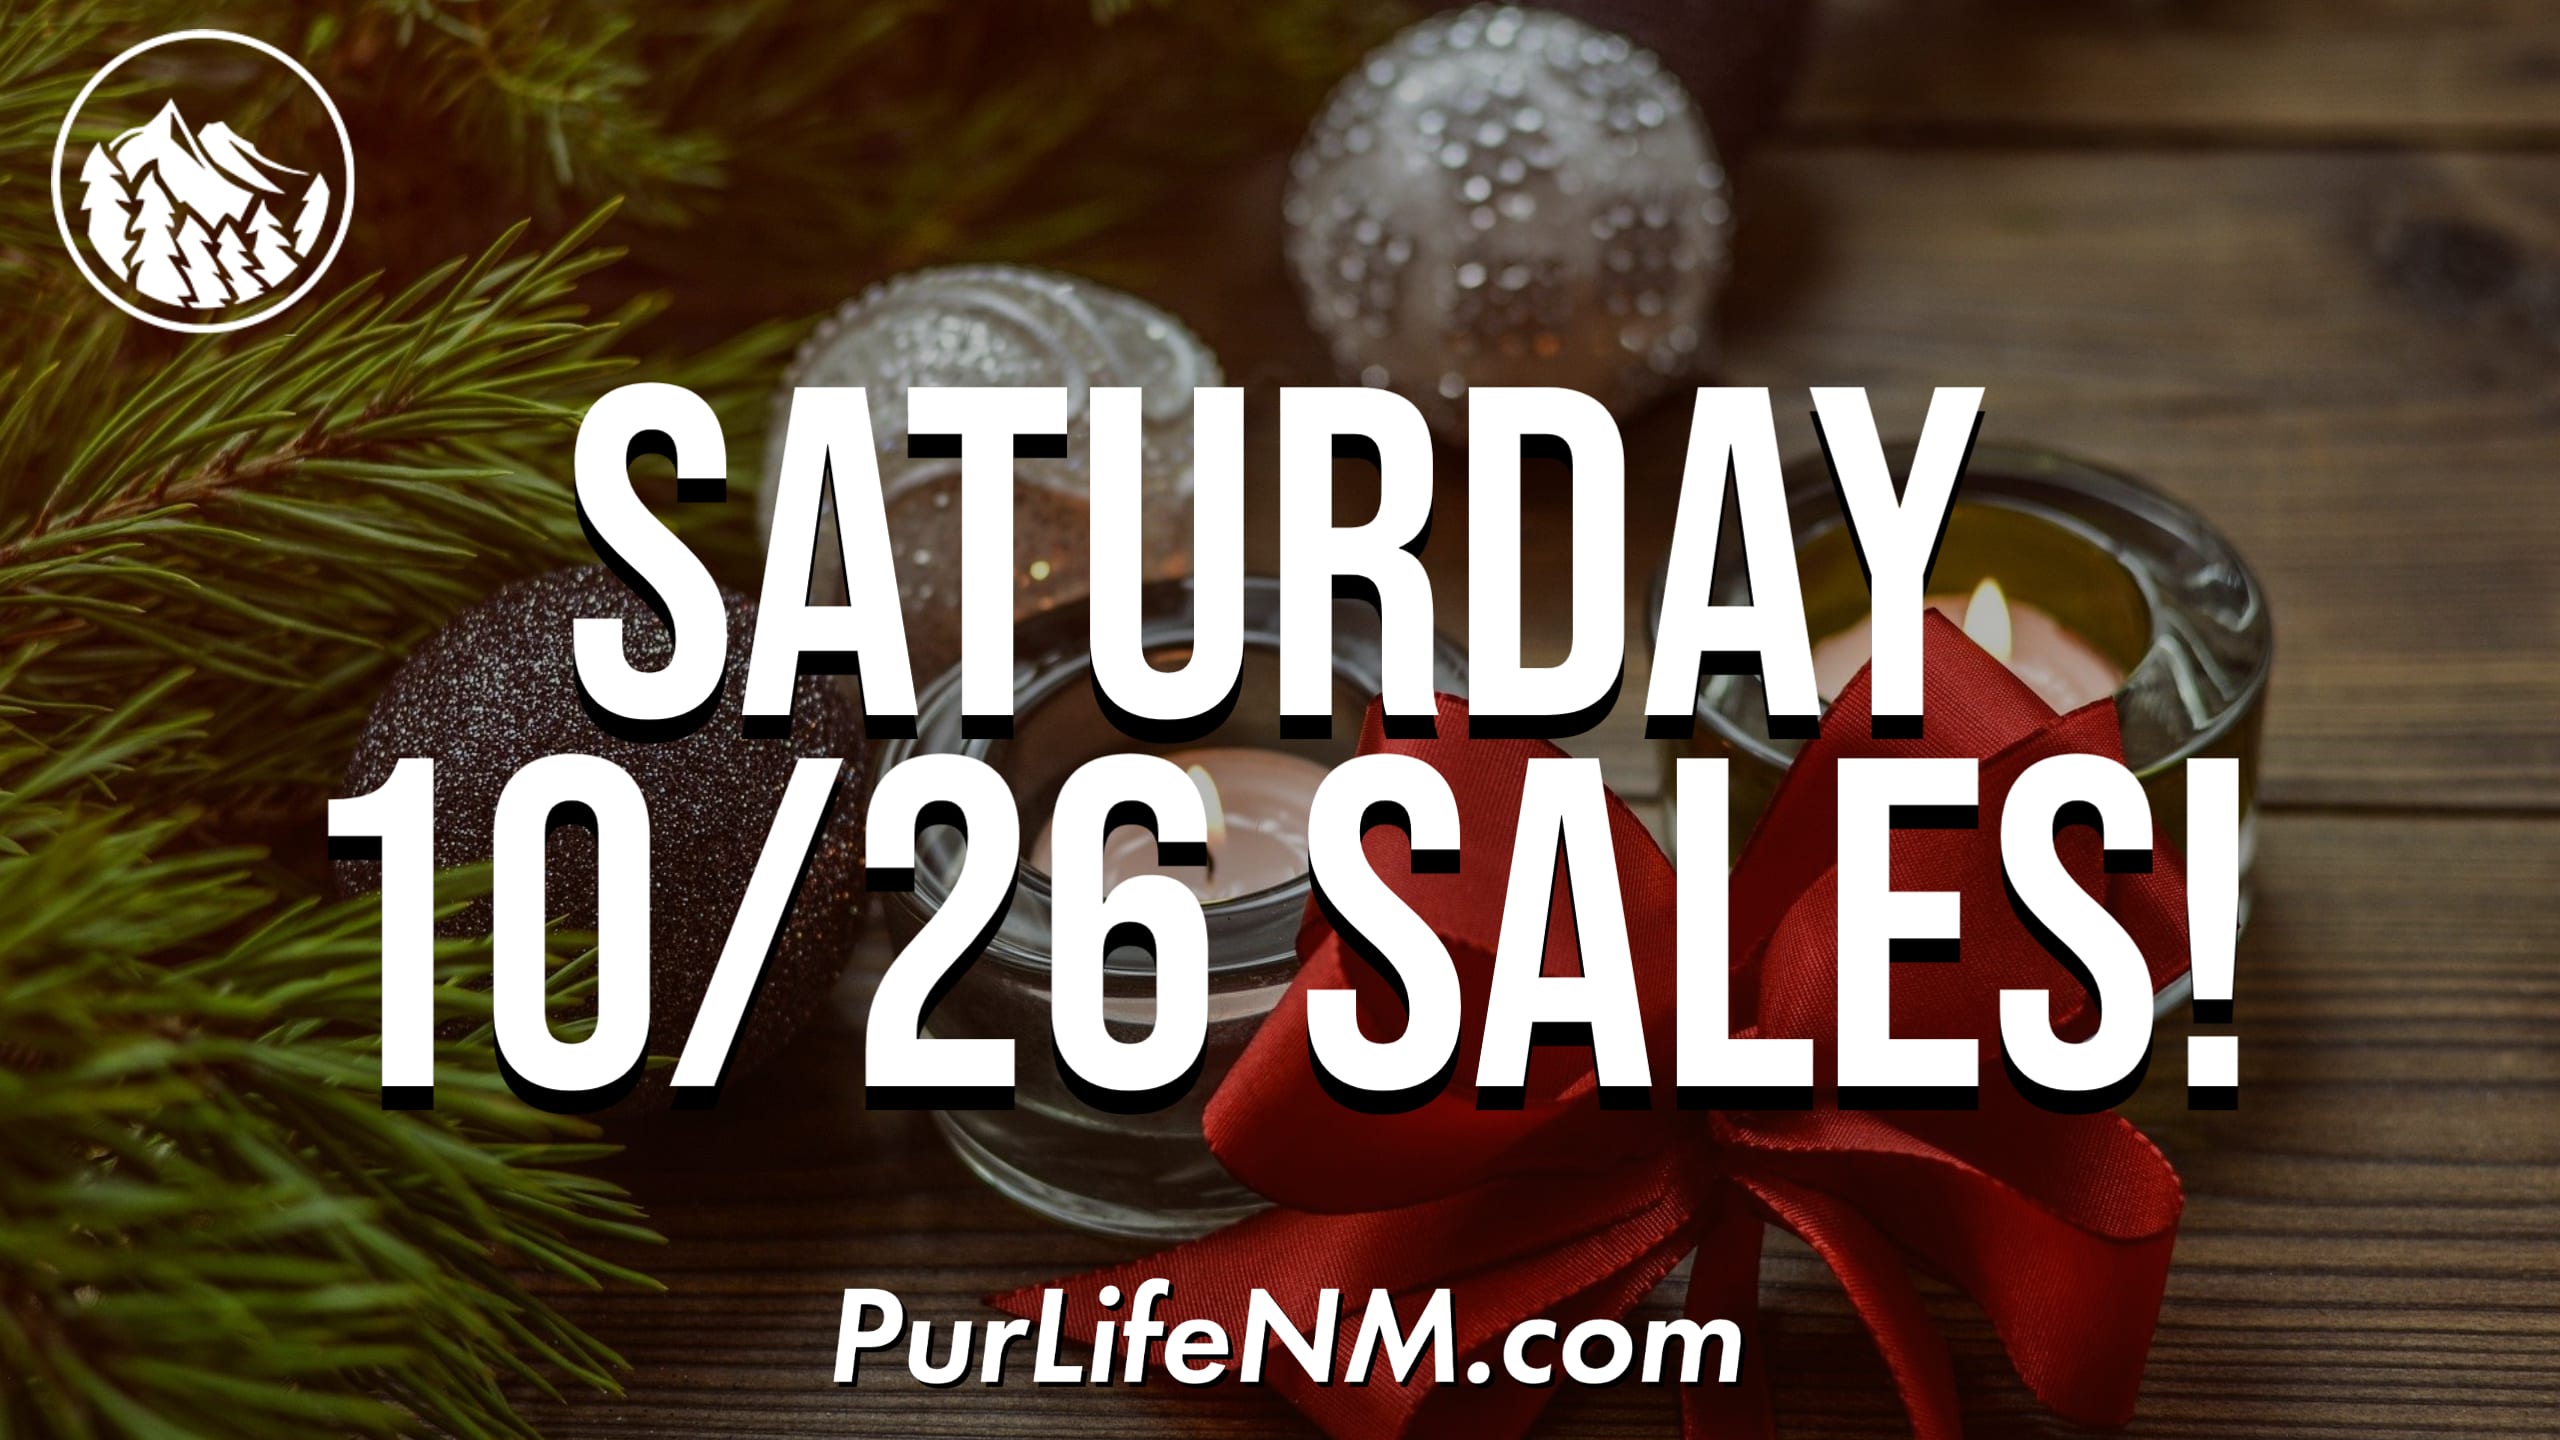 ⛄Day-After-Christmas Sale! - PurLife